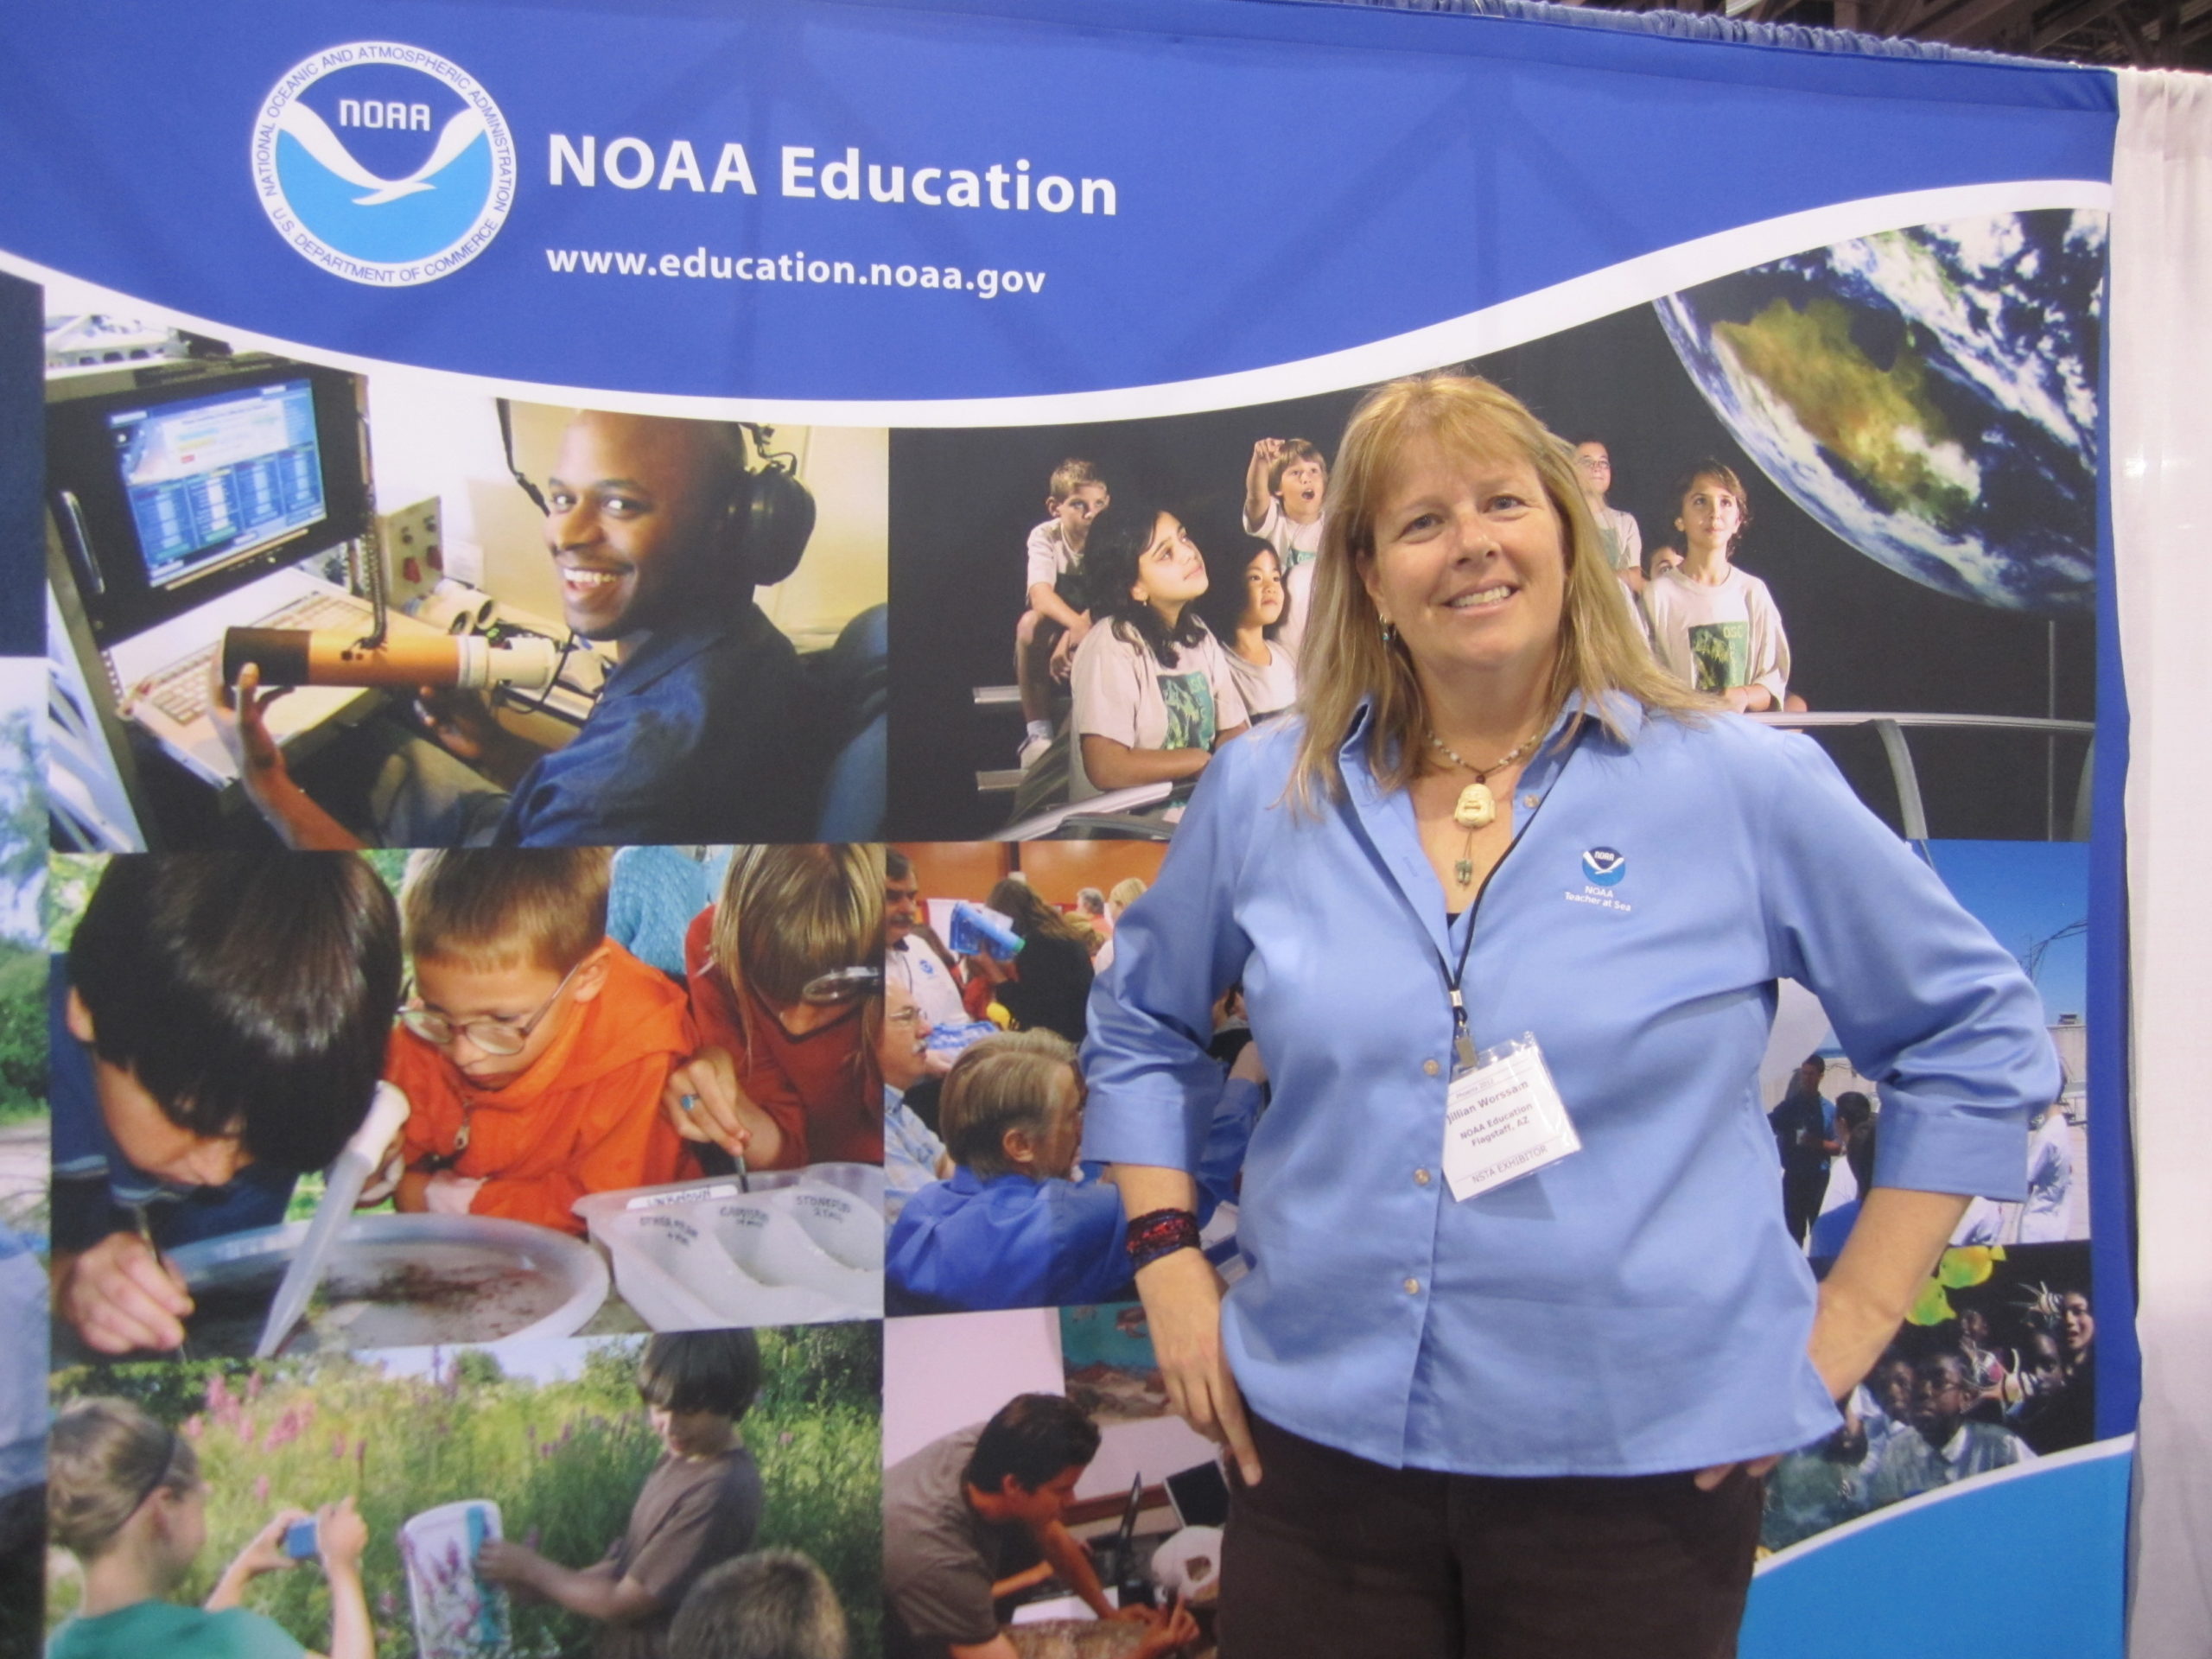 A woman stands in front of a NOAA Education sign.